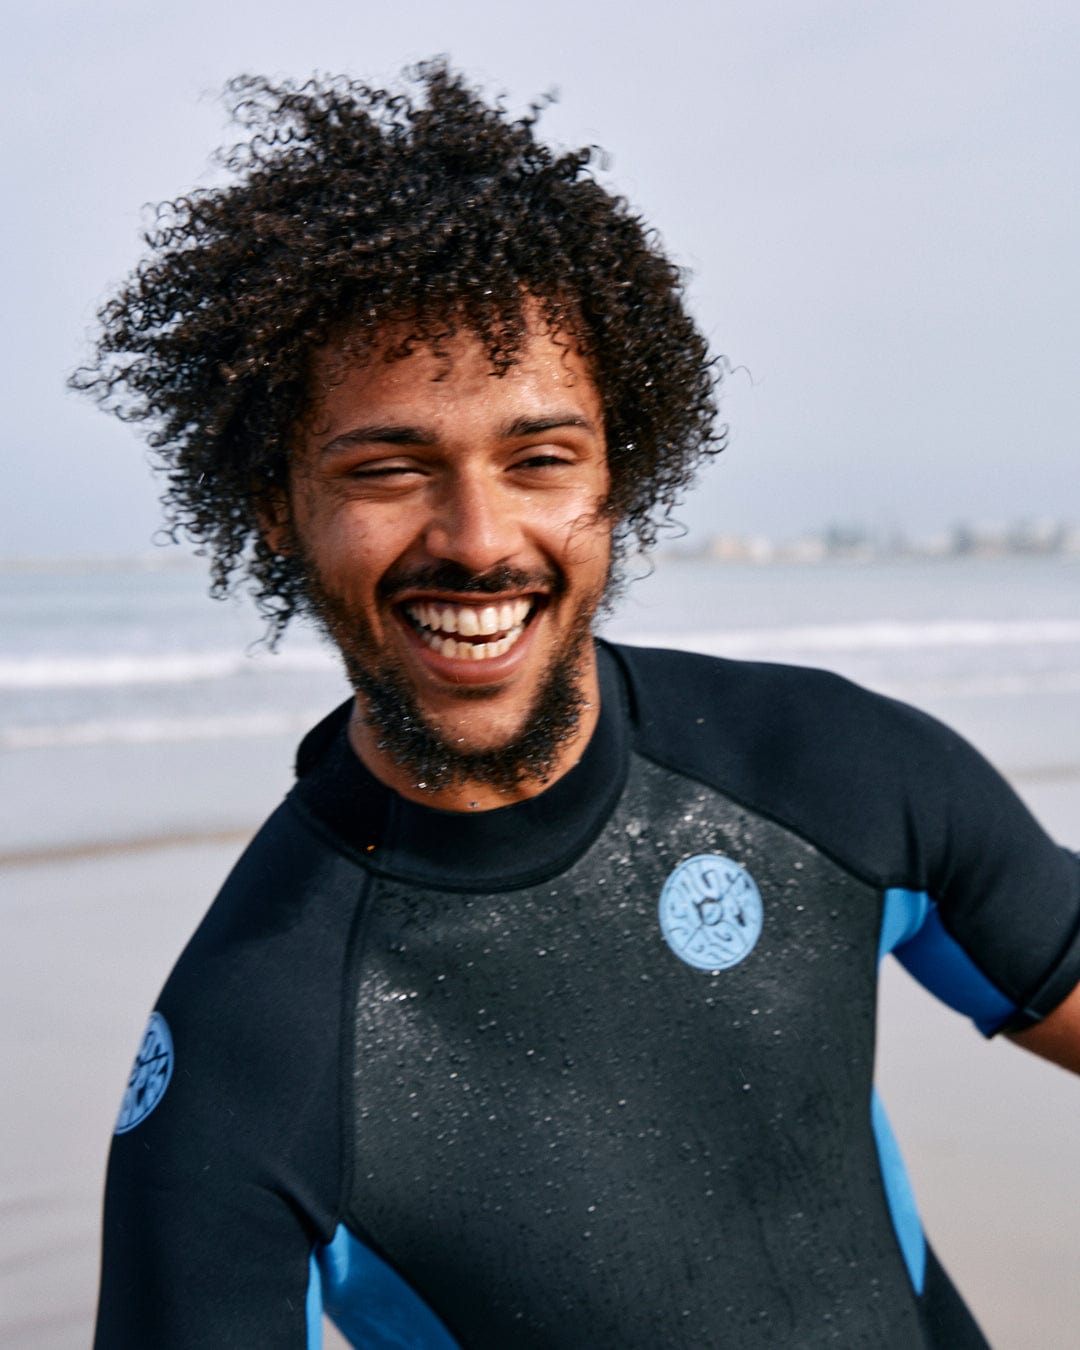 A joyful man in a Saltrock neoprene wetsuit laughing on a beach with the ocean in the background.